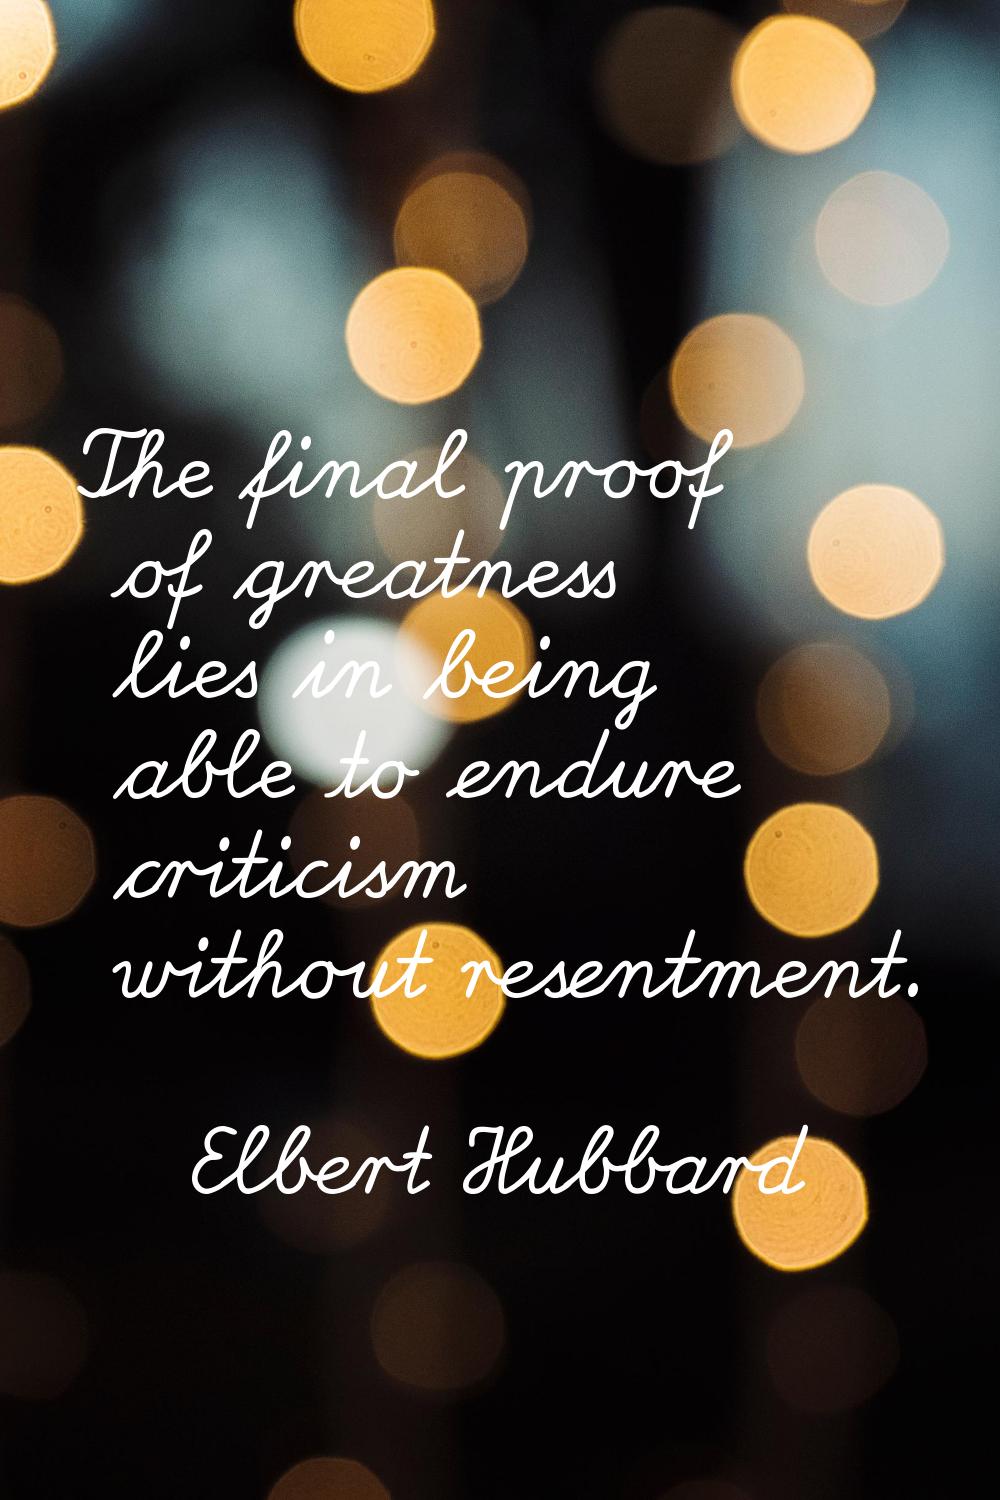 The final proof of greatness lies in being able to endure criticism without resentment.